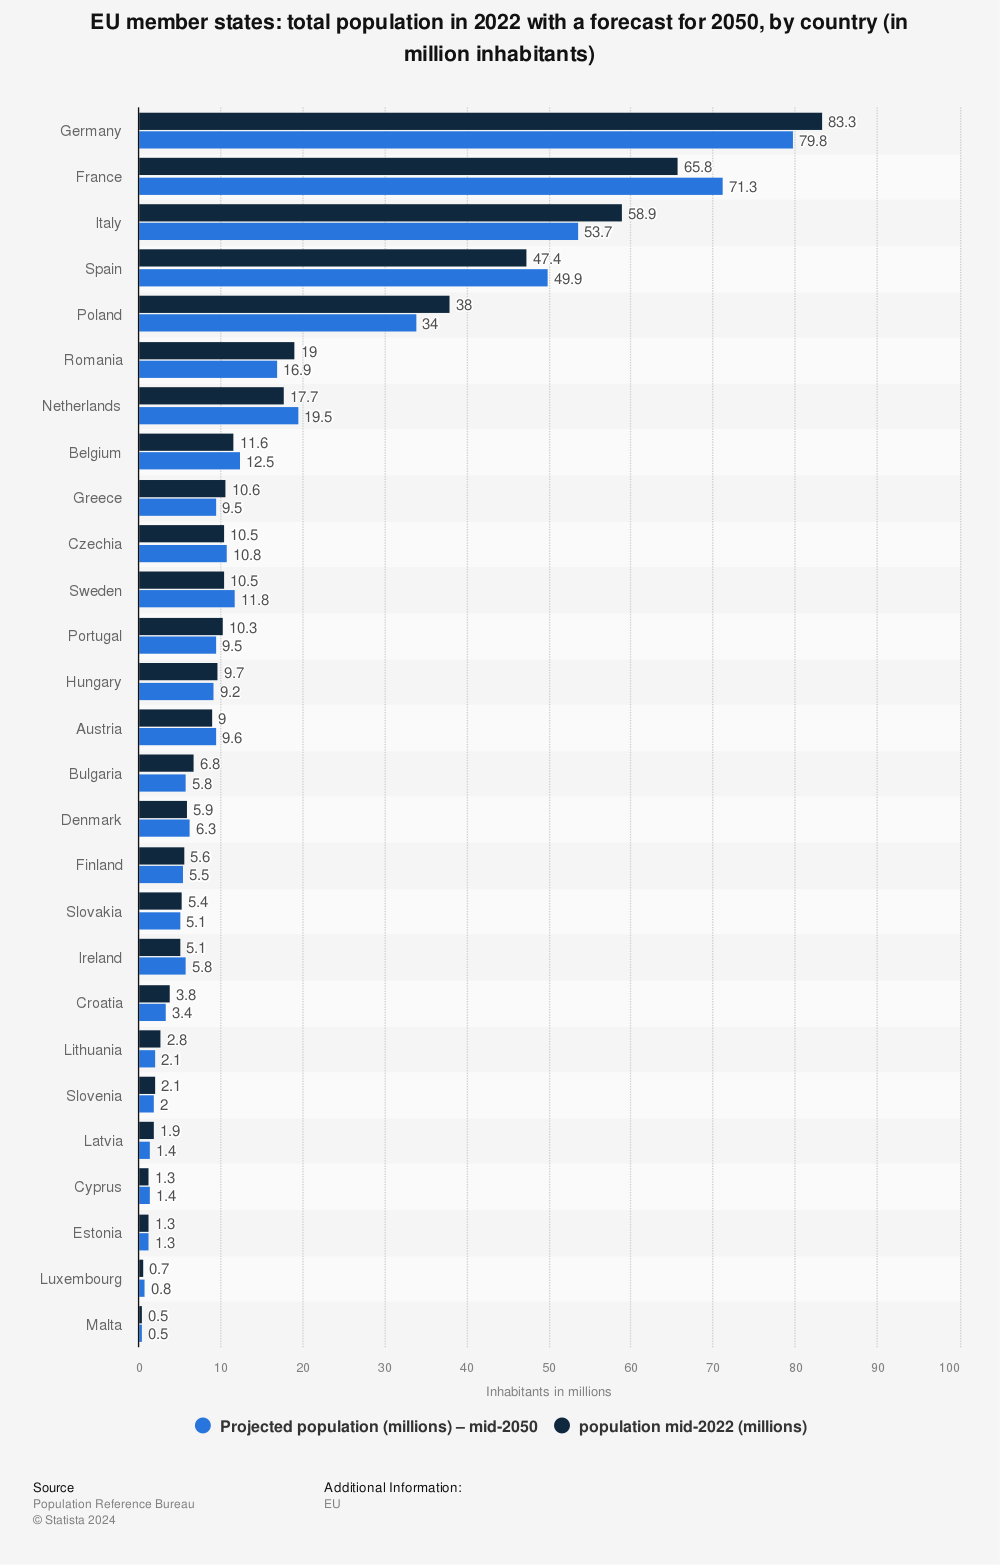 Statistic: EU member states: total population in 2019 with a forecast for 2050, by country (in million inhabitants) | Statista